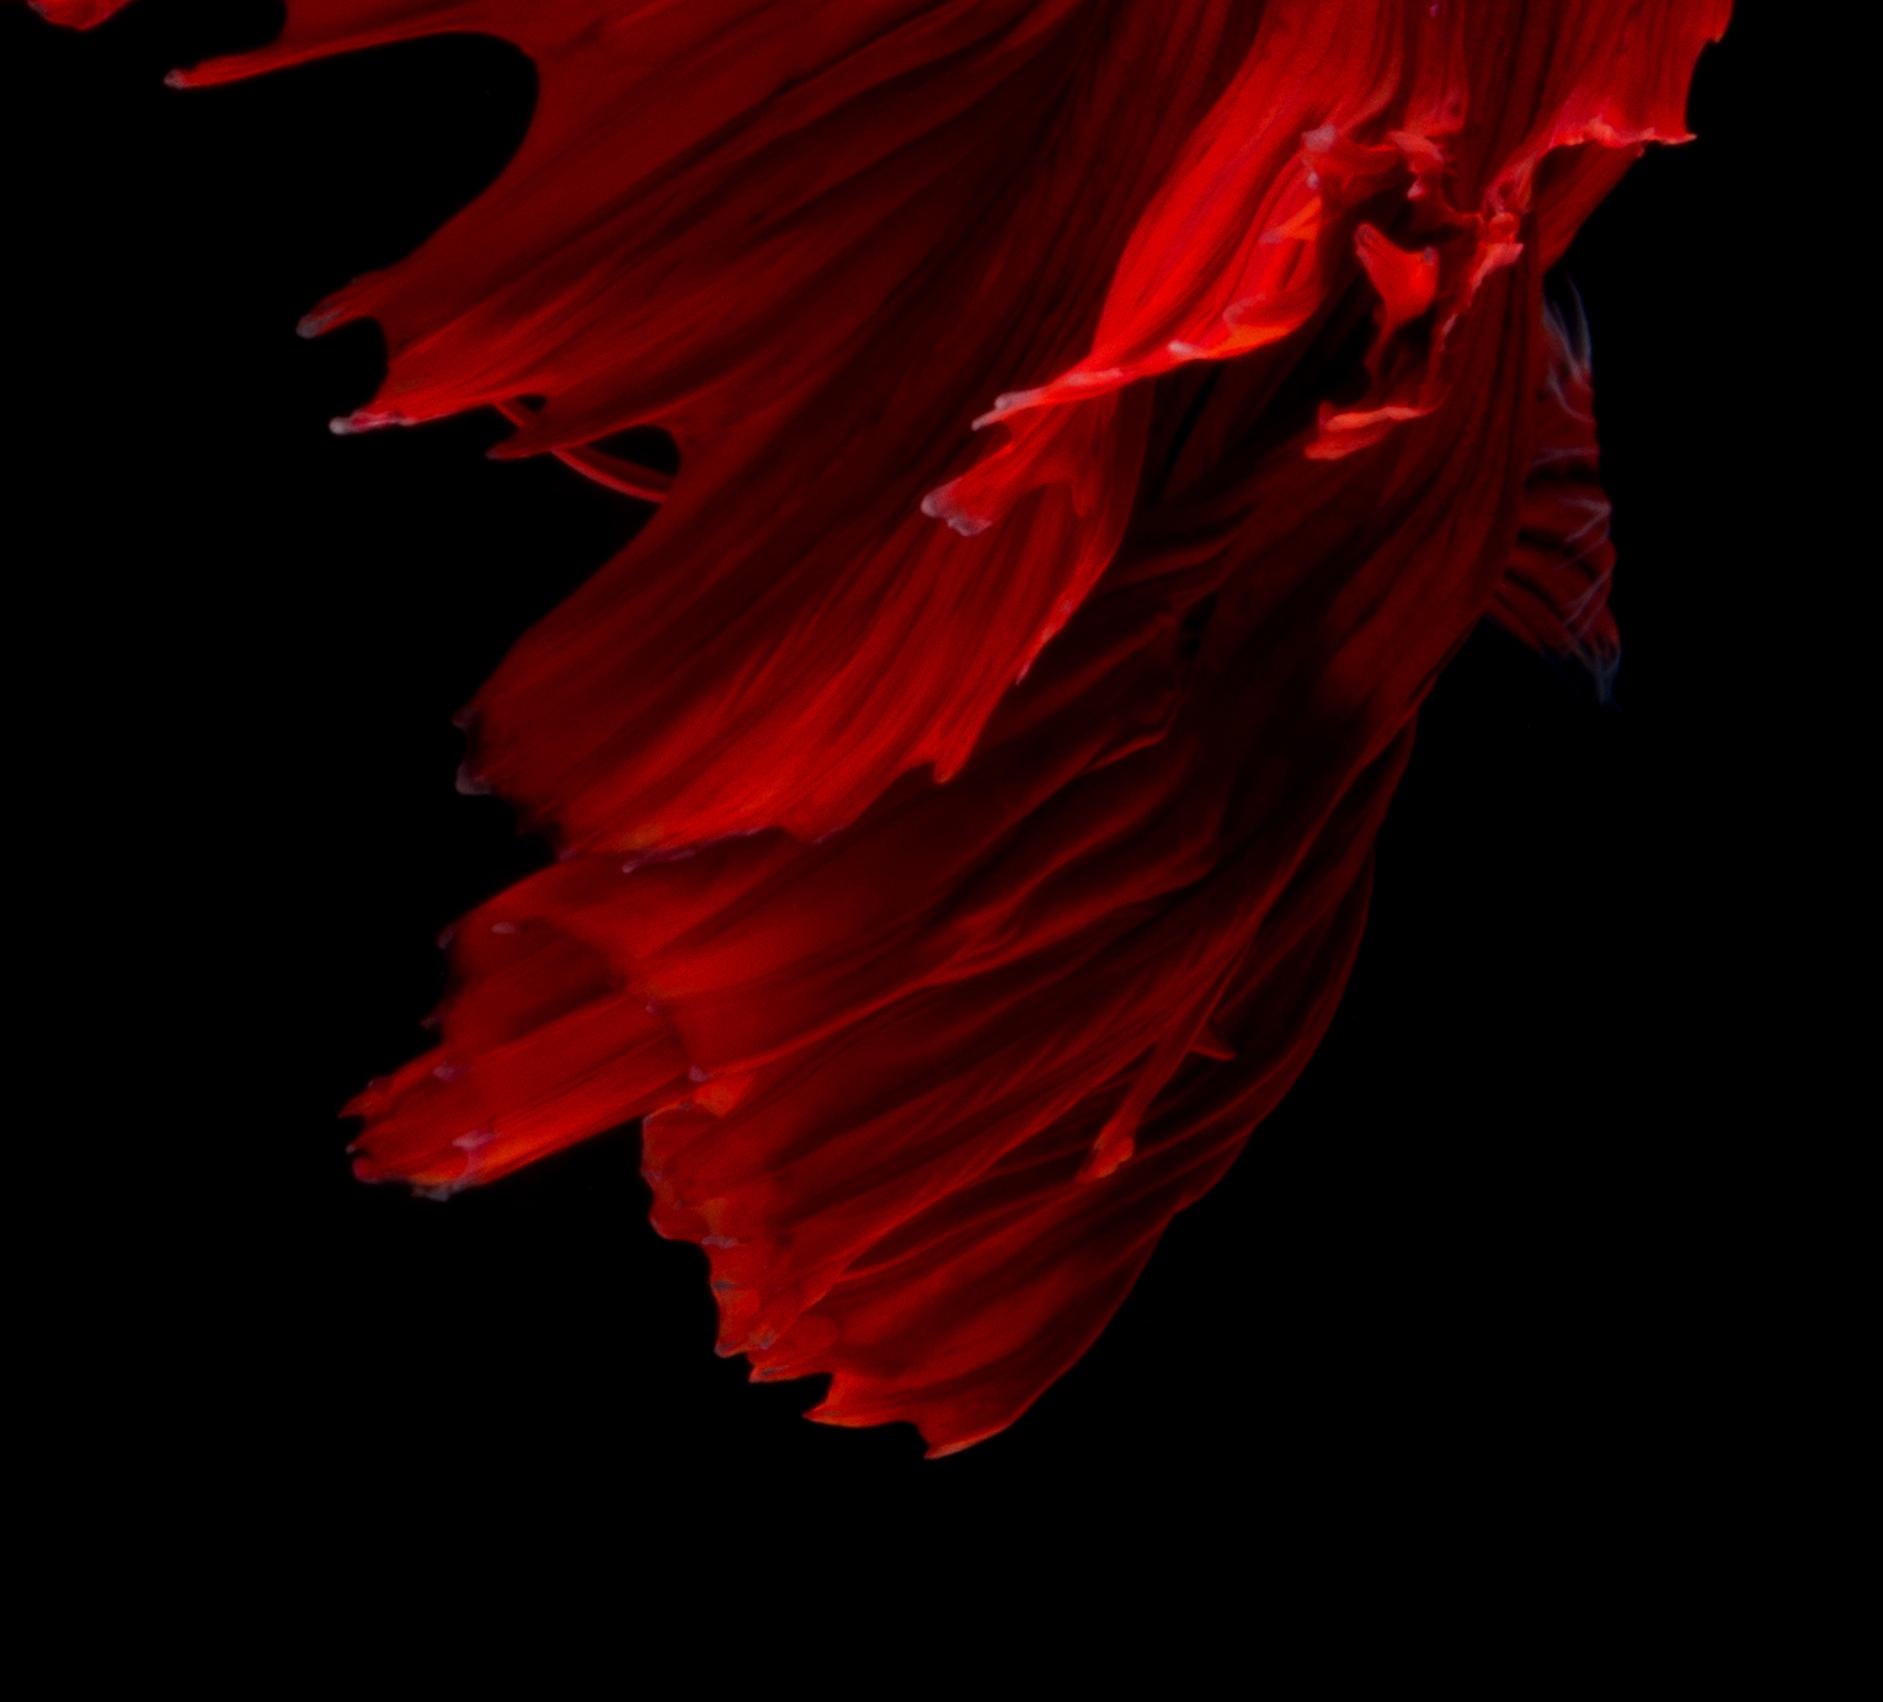 Africa : abstract photography, portrait of nature, contemporary, red and black - Black Figurative Photograph by Visarute Angkatavanich